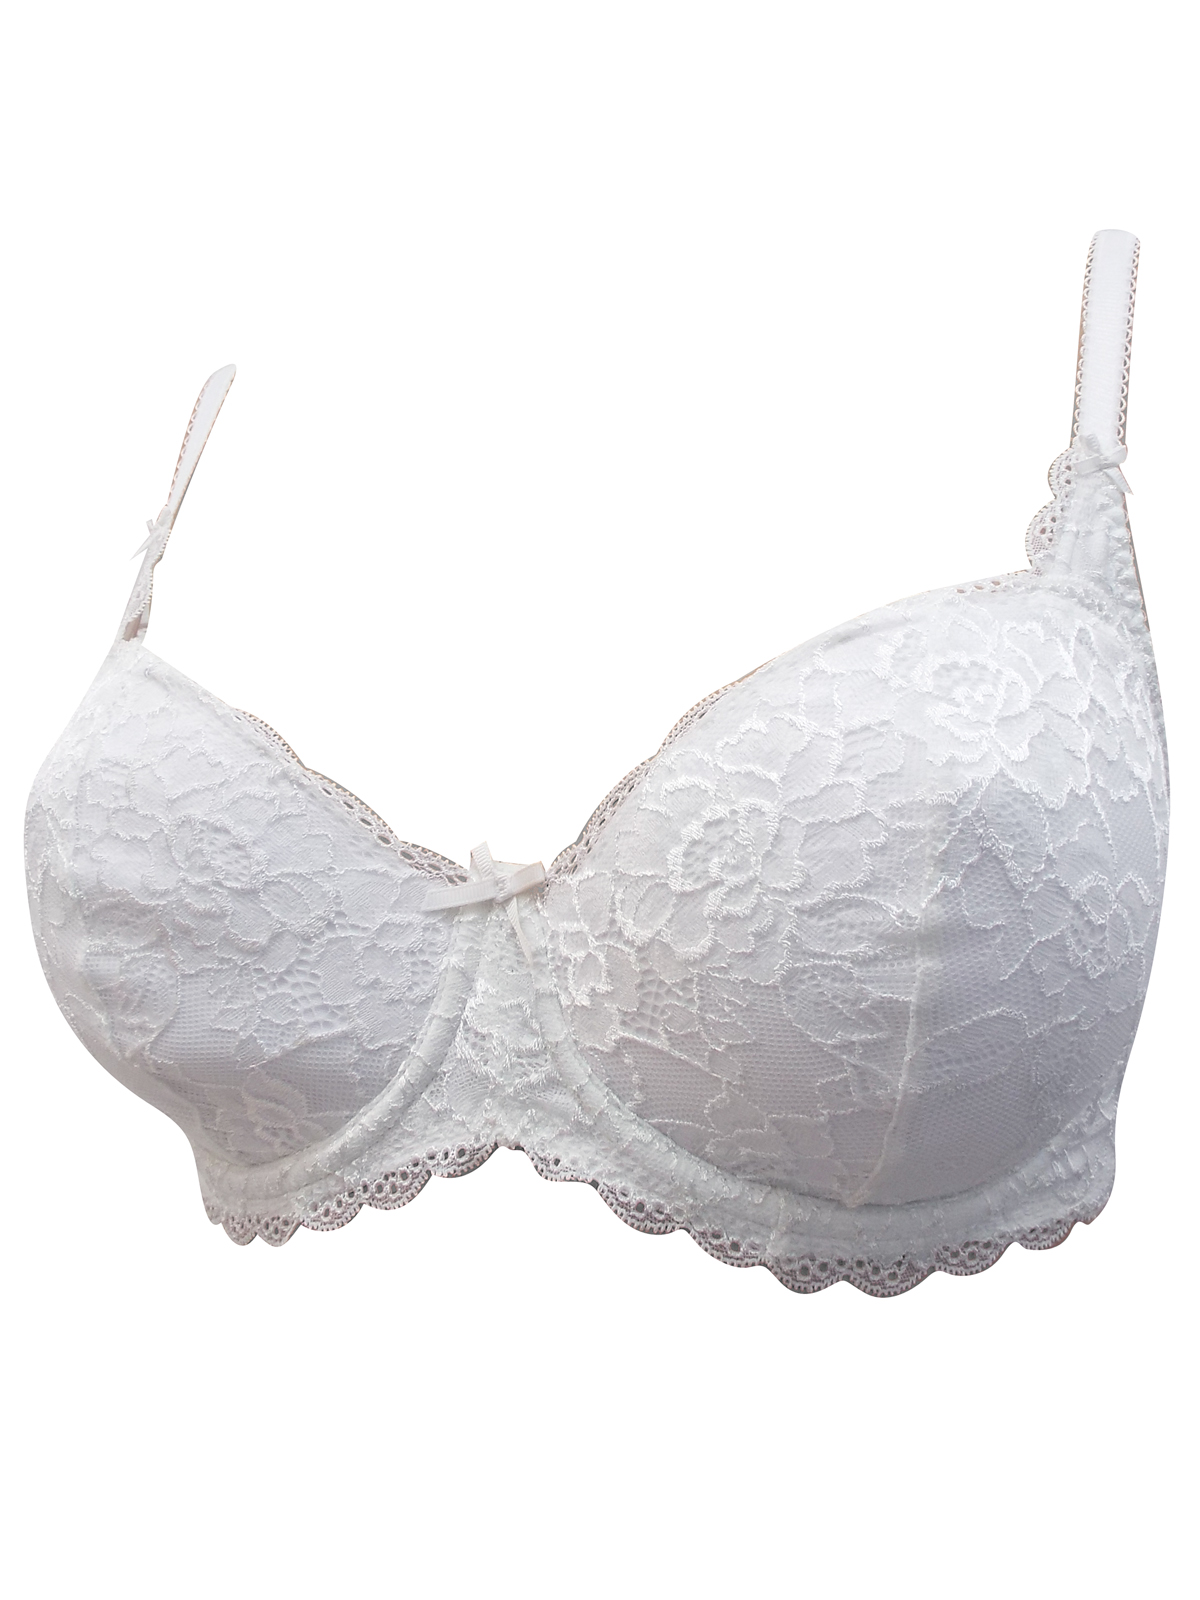 F&F - - F&F WHITE Overlaid Floral Lace Underwired Fuller Bust Bra ...